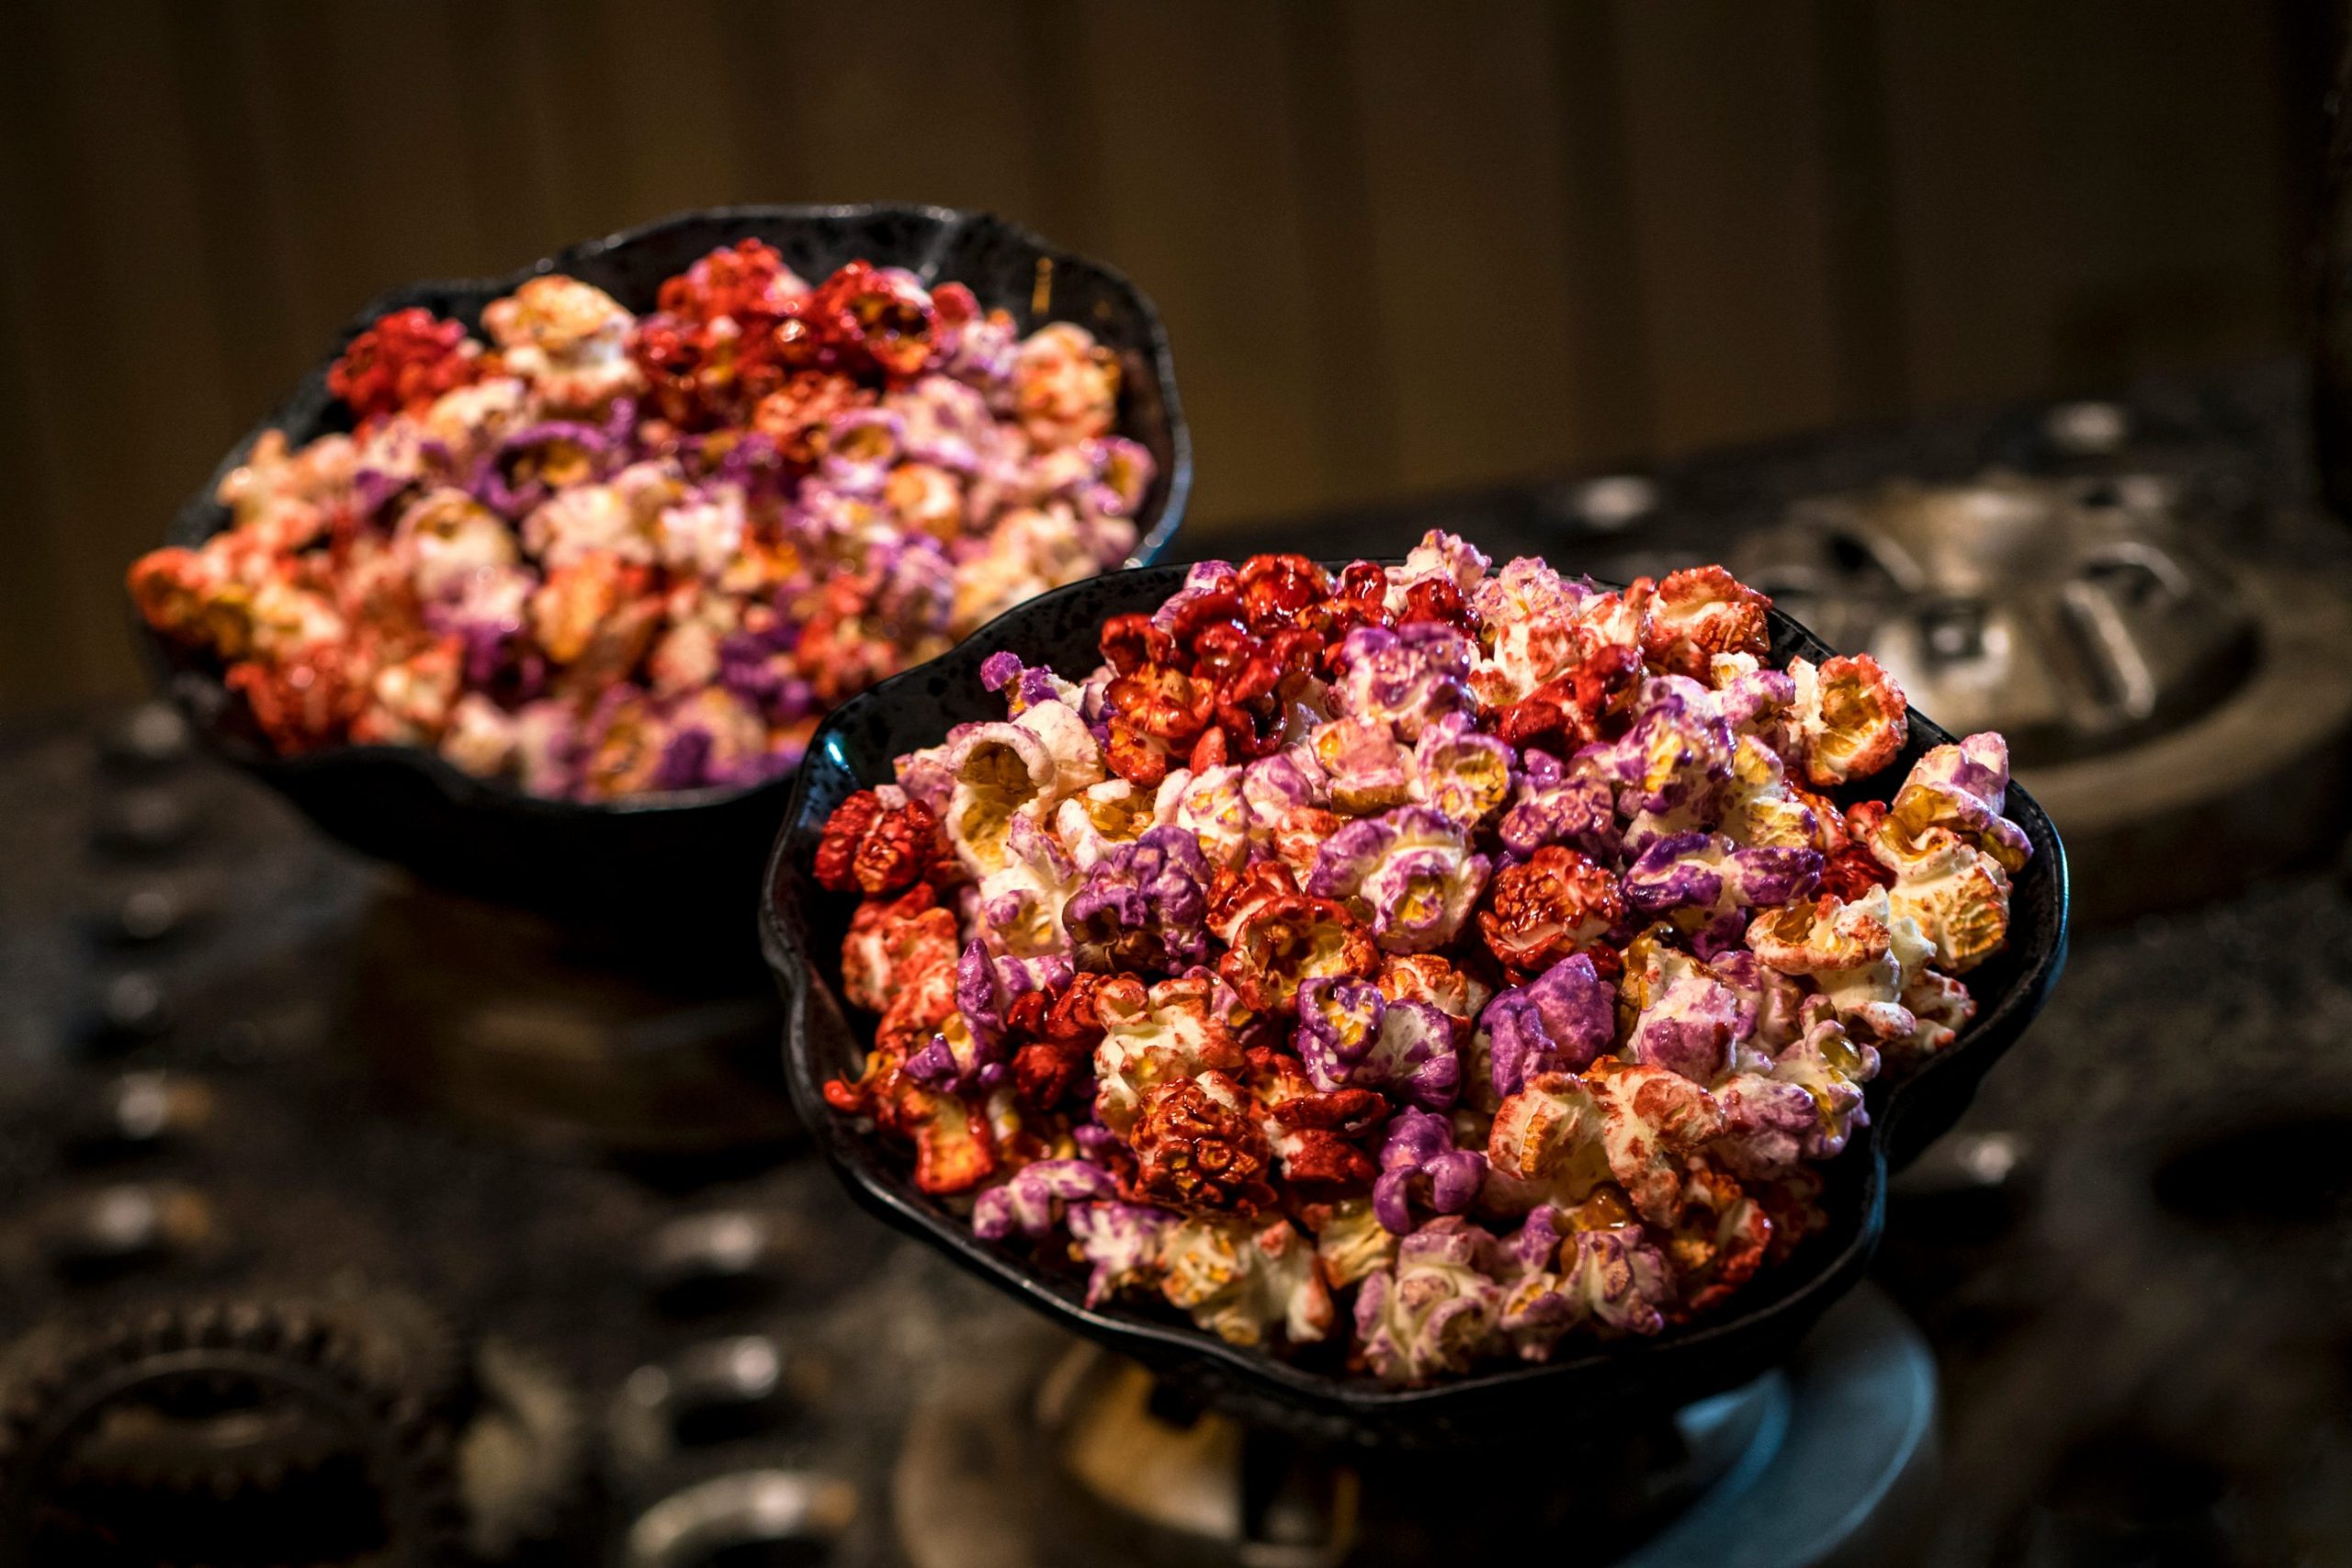 Galaxy's Edge Food What to Try at Star Wars Land in Disneyland